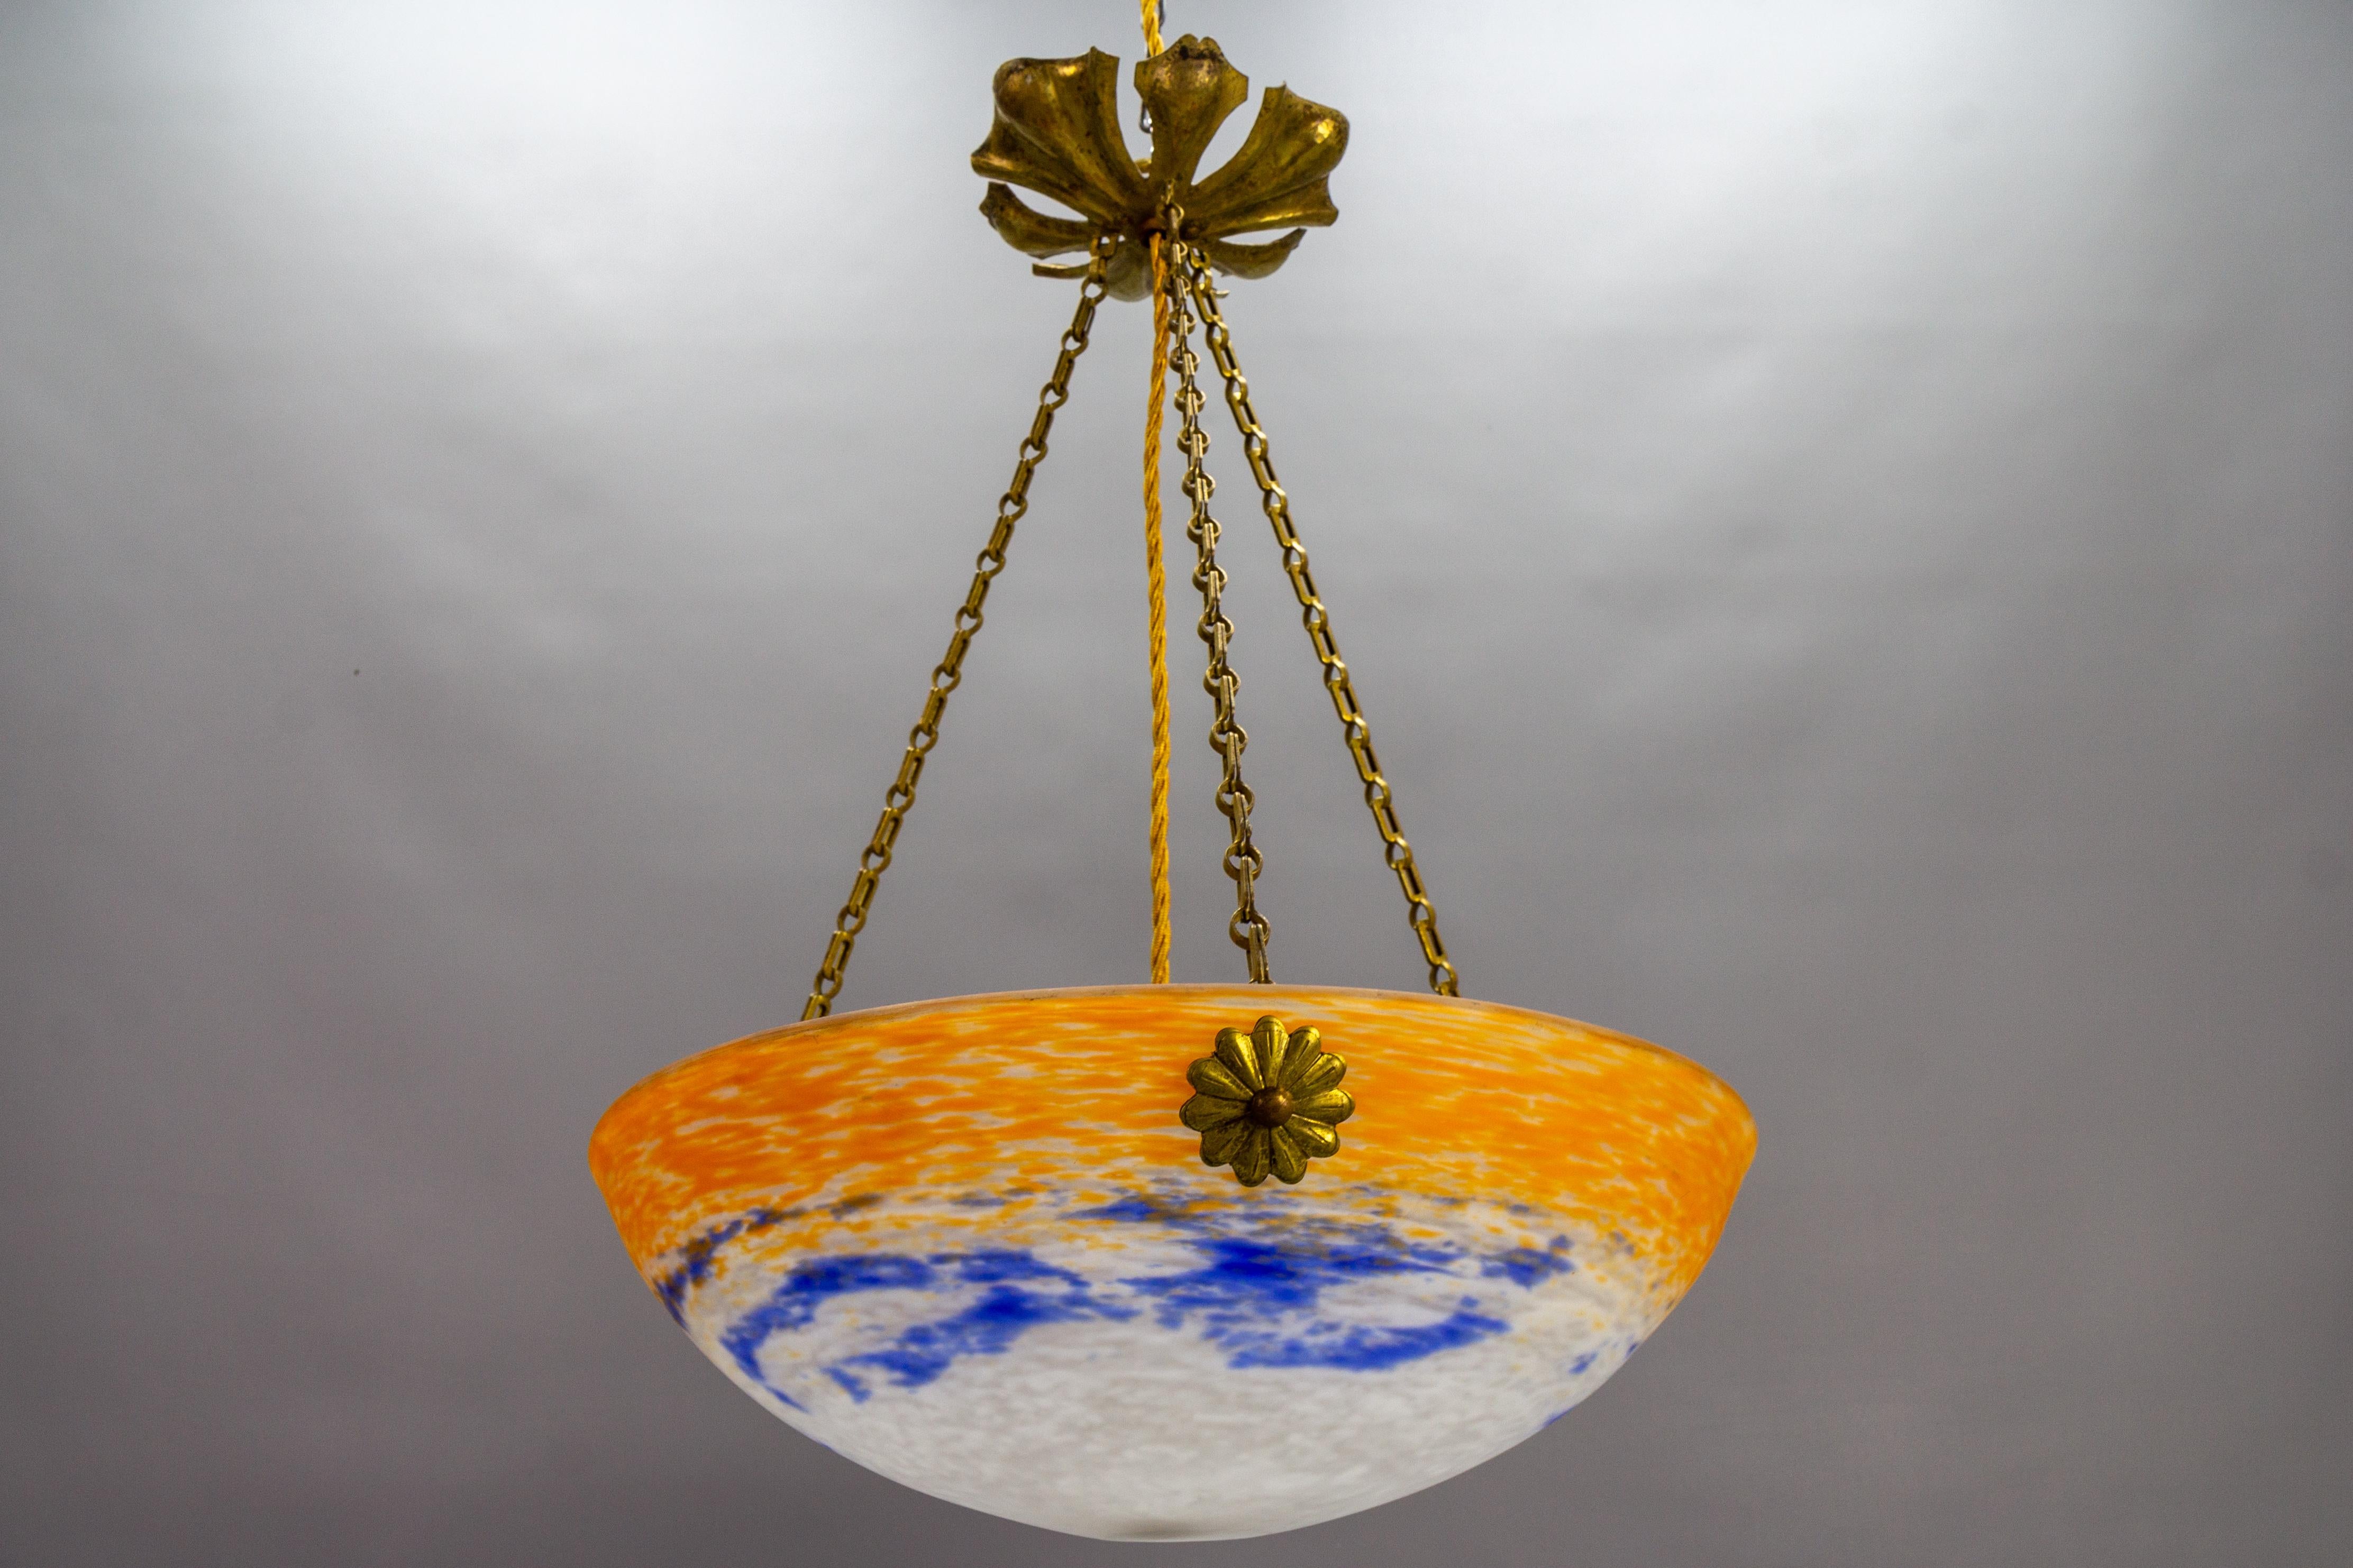 French Art Nouveau Orange, White and Blue Glass Pendant Light by Noverdy, 1920s For Sale 8